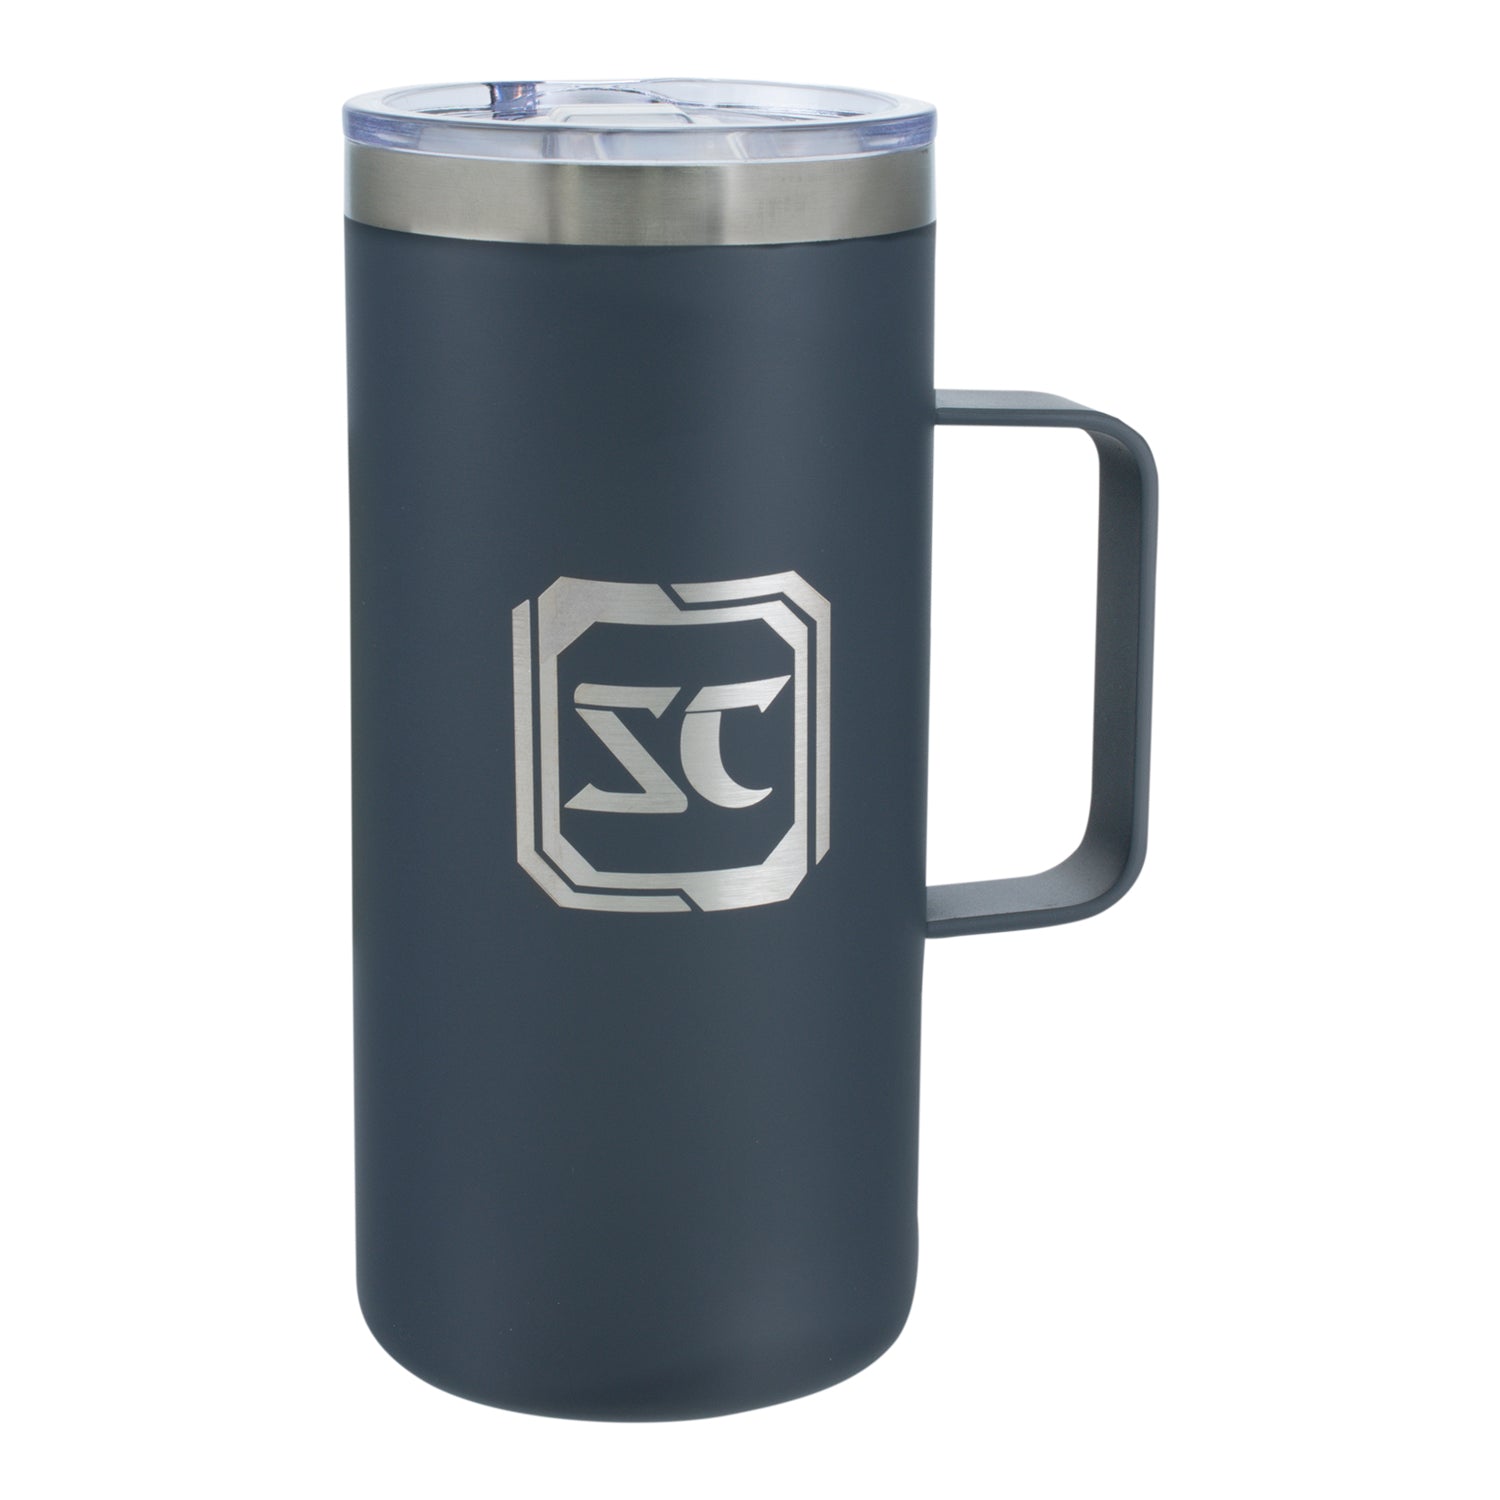 StarCraft 18 oz Stainless Steel Mug - Front View